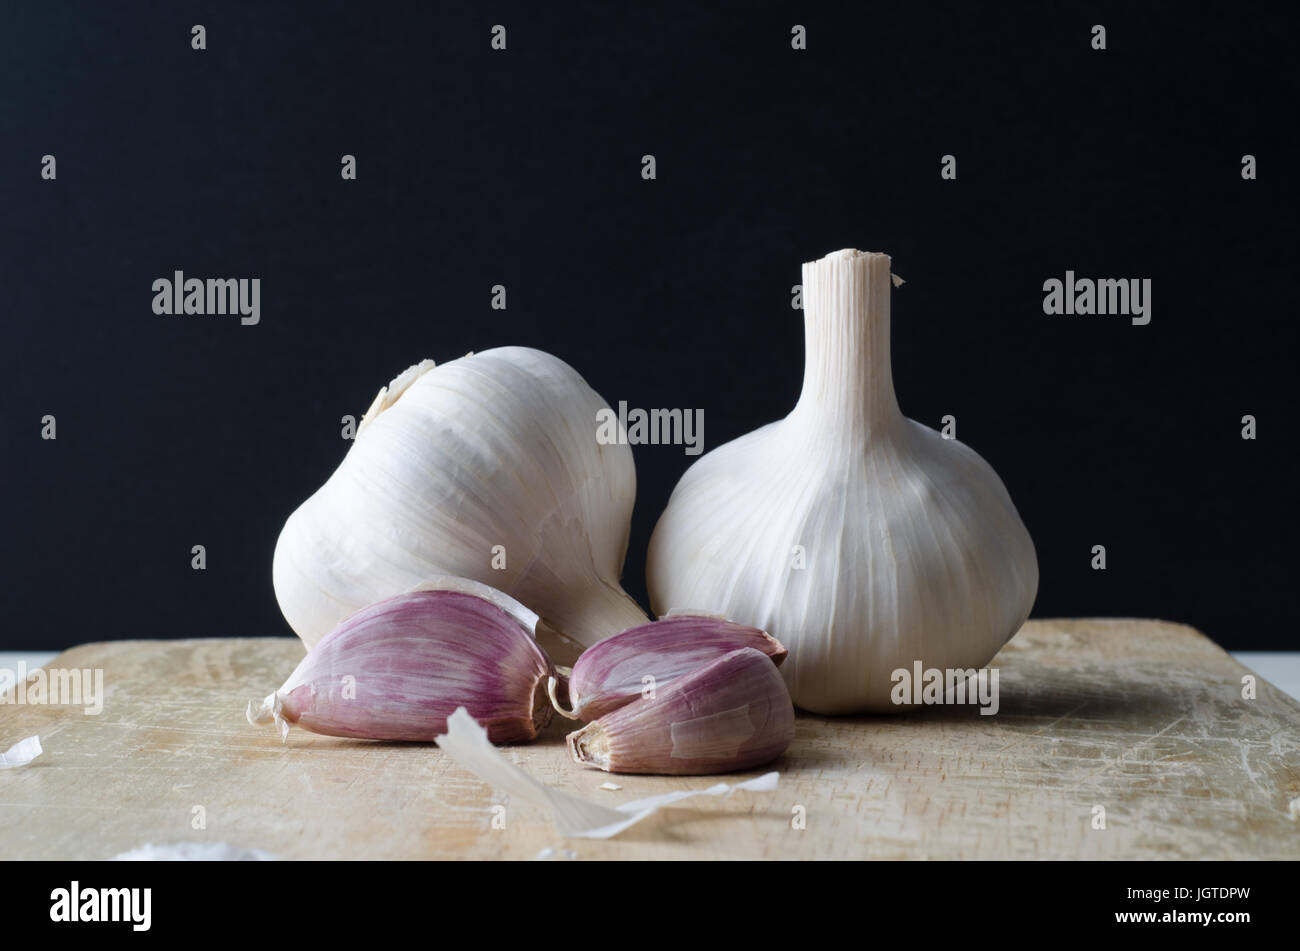 Two whole, unpeeled garlic bulbs and three pink garlic cloves on a scratched old wooden chopping board, with outer peelings scattered around.  Black b Stock Photo